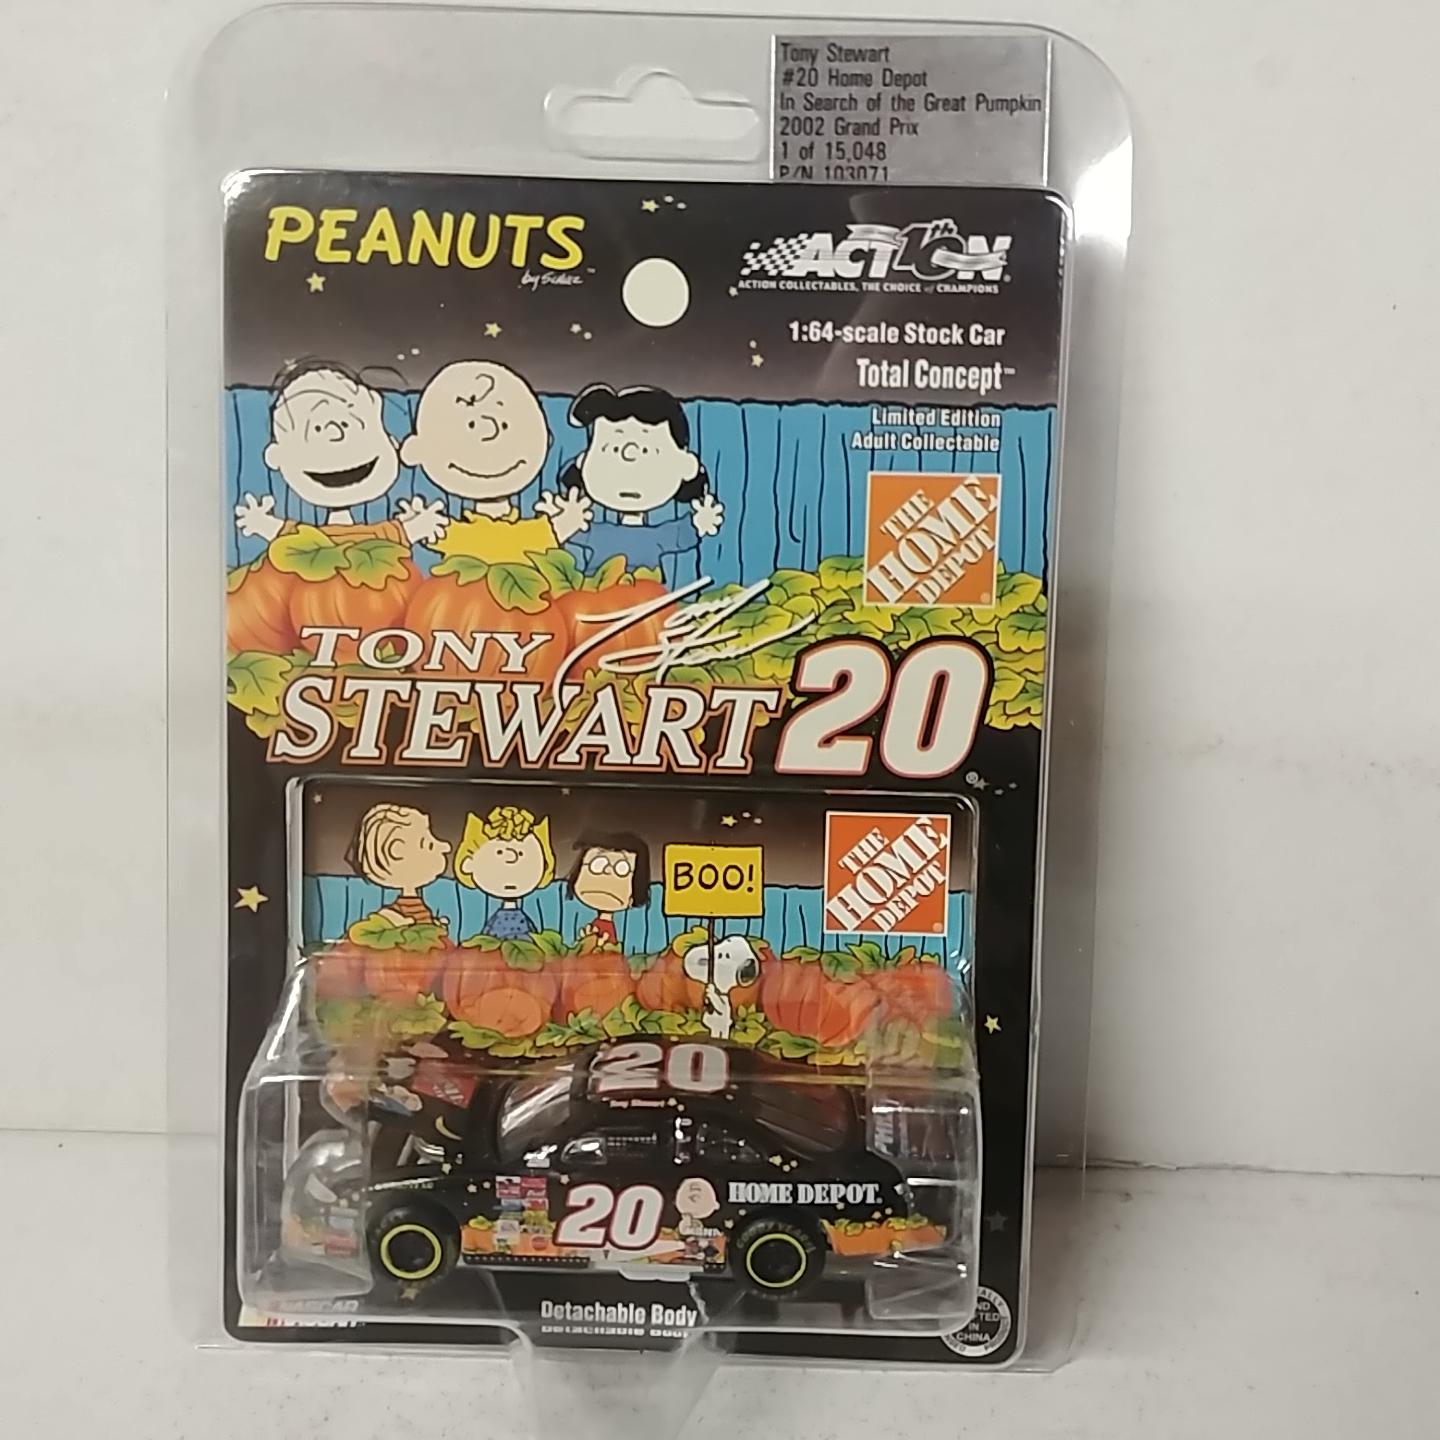 2002 Tony Stewart 1/64th Home Depot  "In Search of the Great Pumpkin" Total Concept hood open Grand Prix